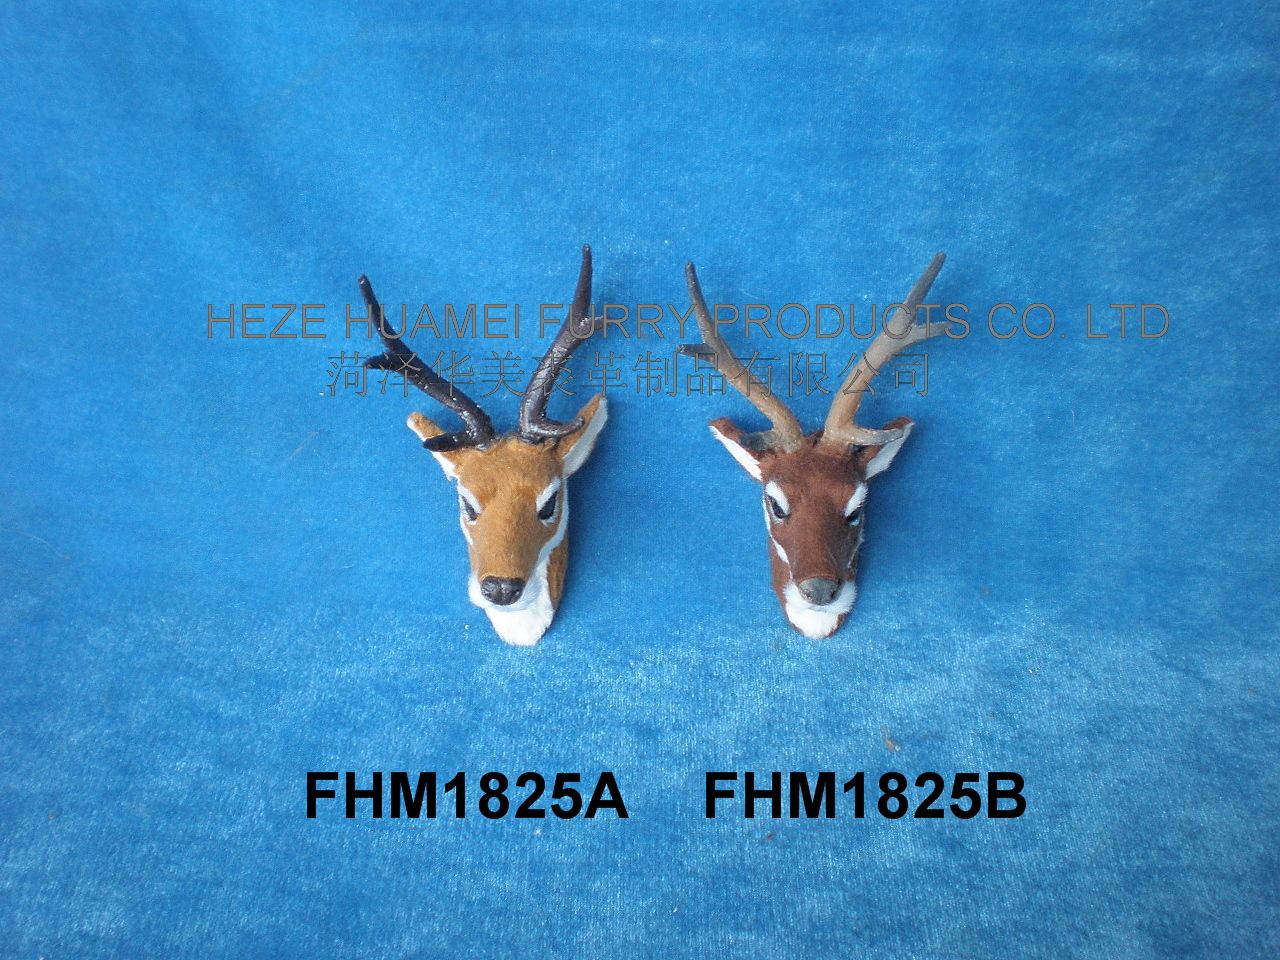 FHM1825,HEZE YUHANG FURRY PRODUCTS CO., LTD.